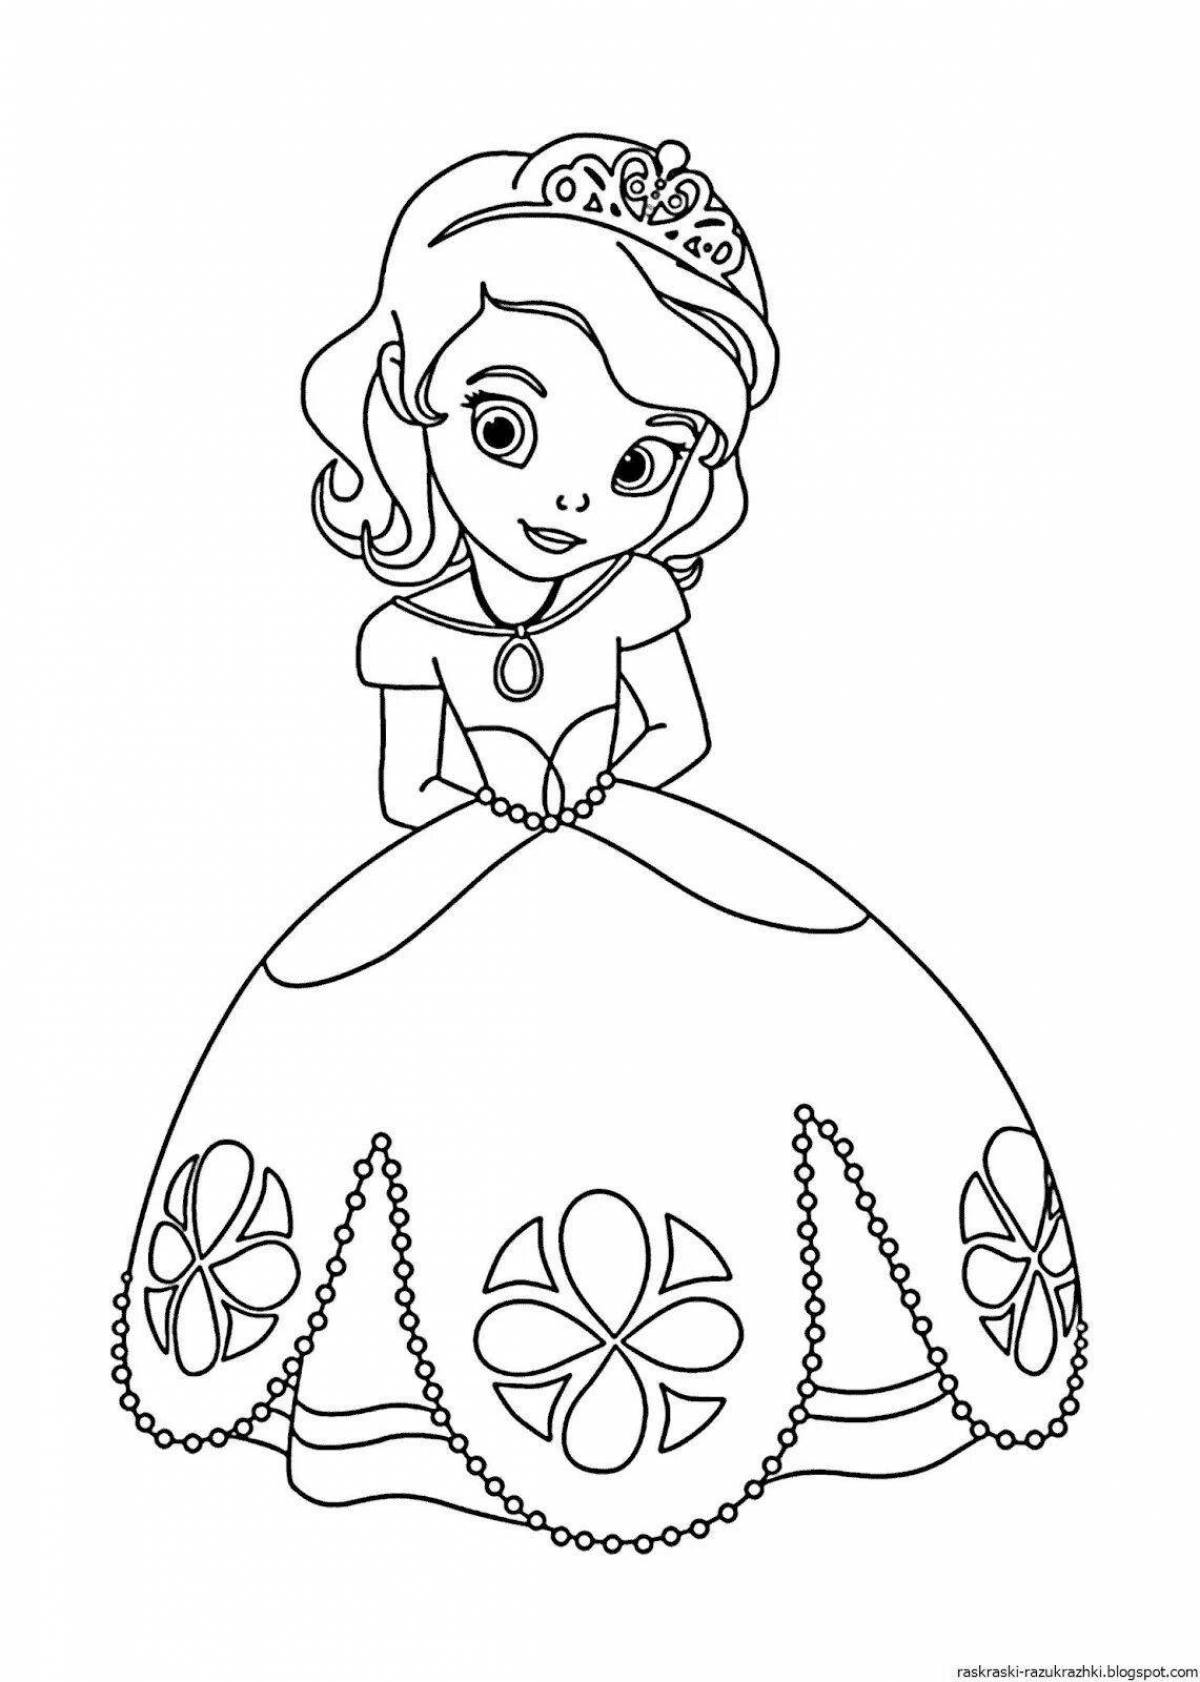 Fairytale coloring book for girls princesses 5-6 years old